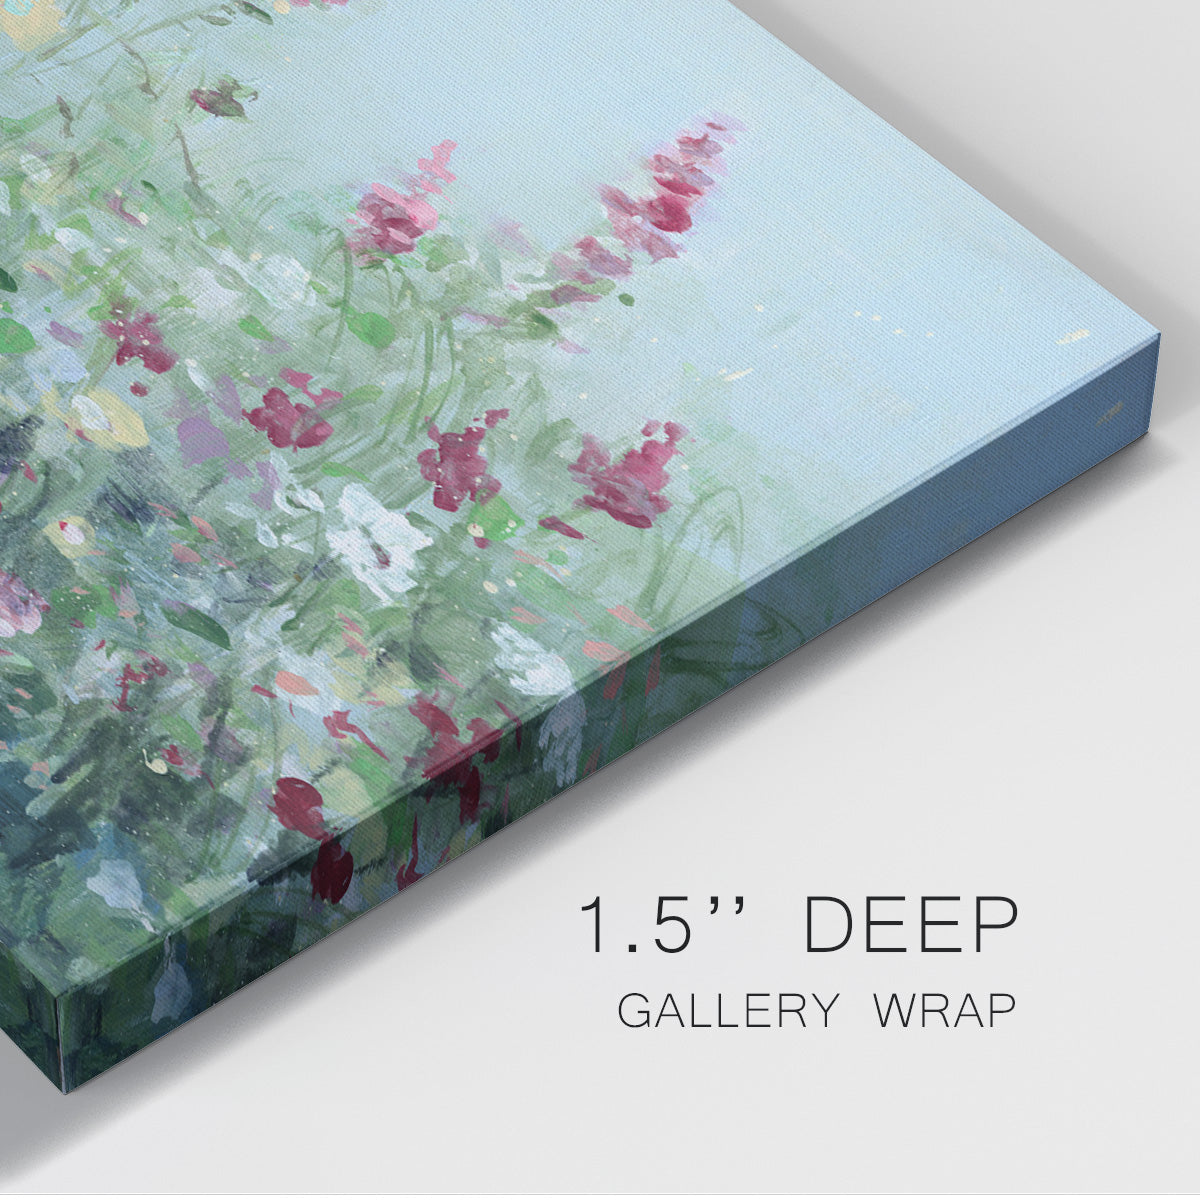 Sweet Summer Meadow Premium Gallery Wrapped Canvas - Ready to Hang